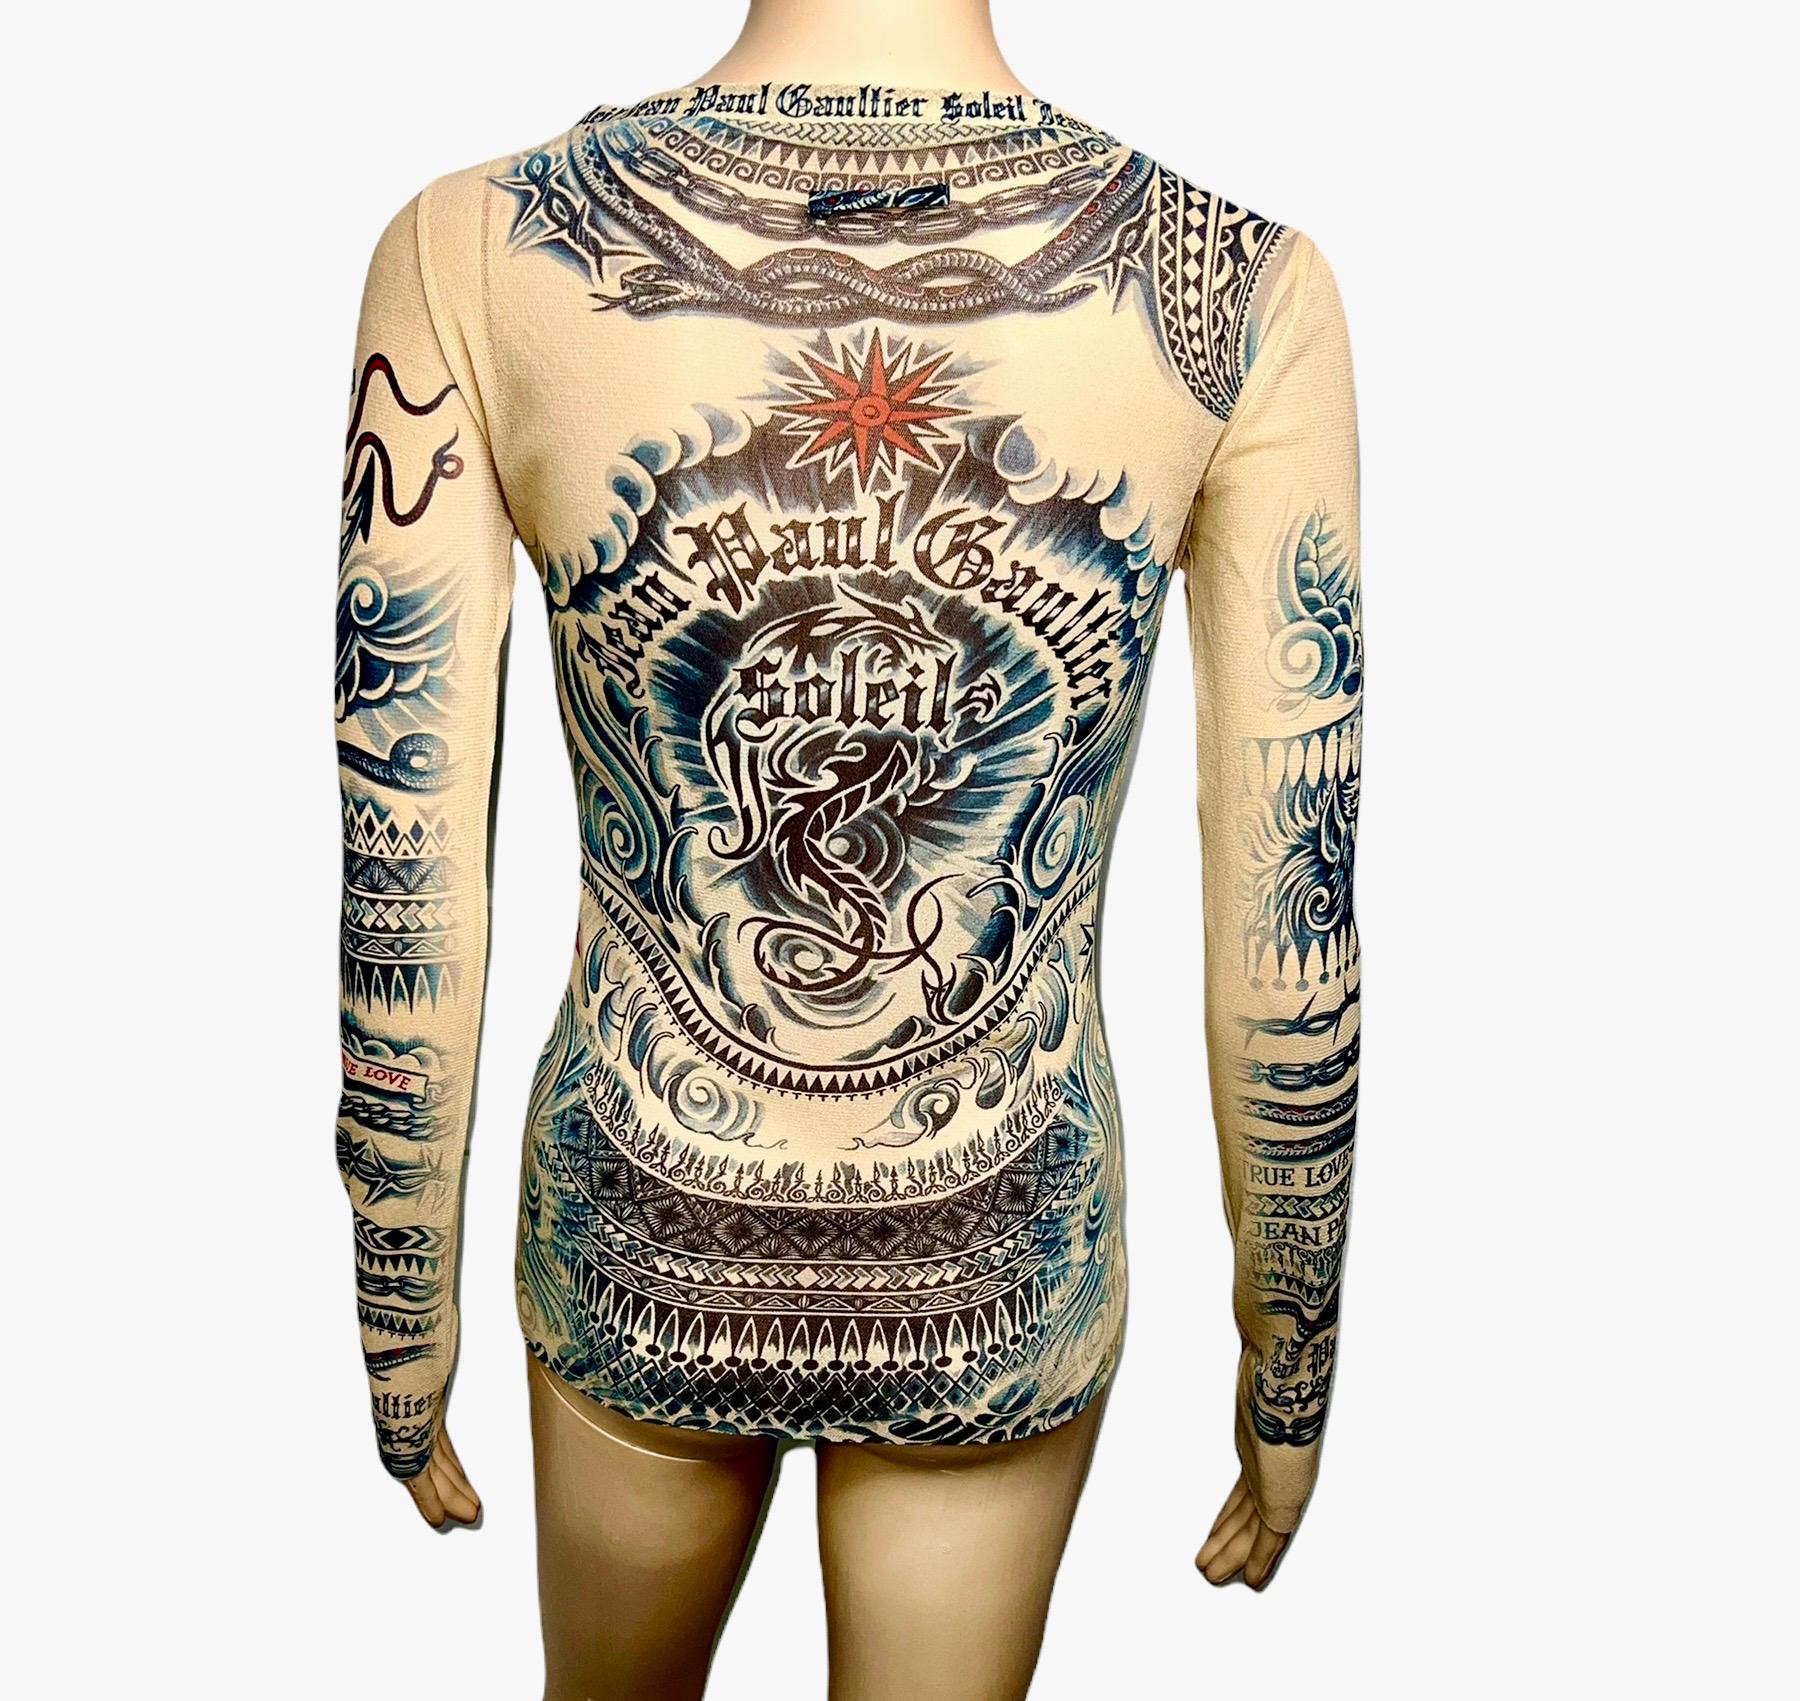 Jean Paul Gaultier Soleil Vintage Tattoo Print Sheer Mesh Top In Good Condition For Sale In Naples, FL